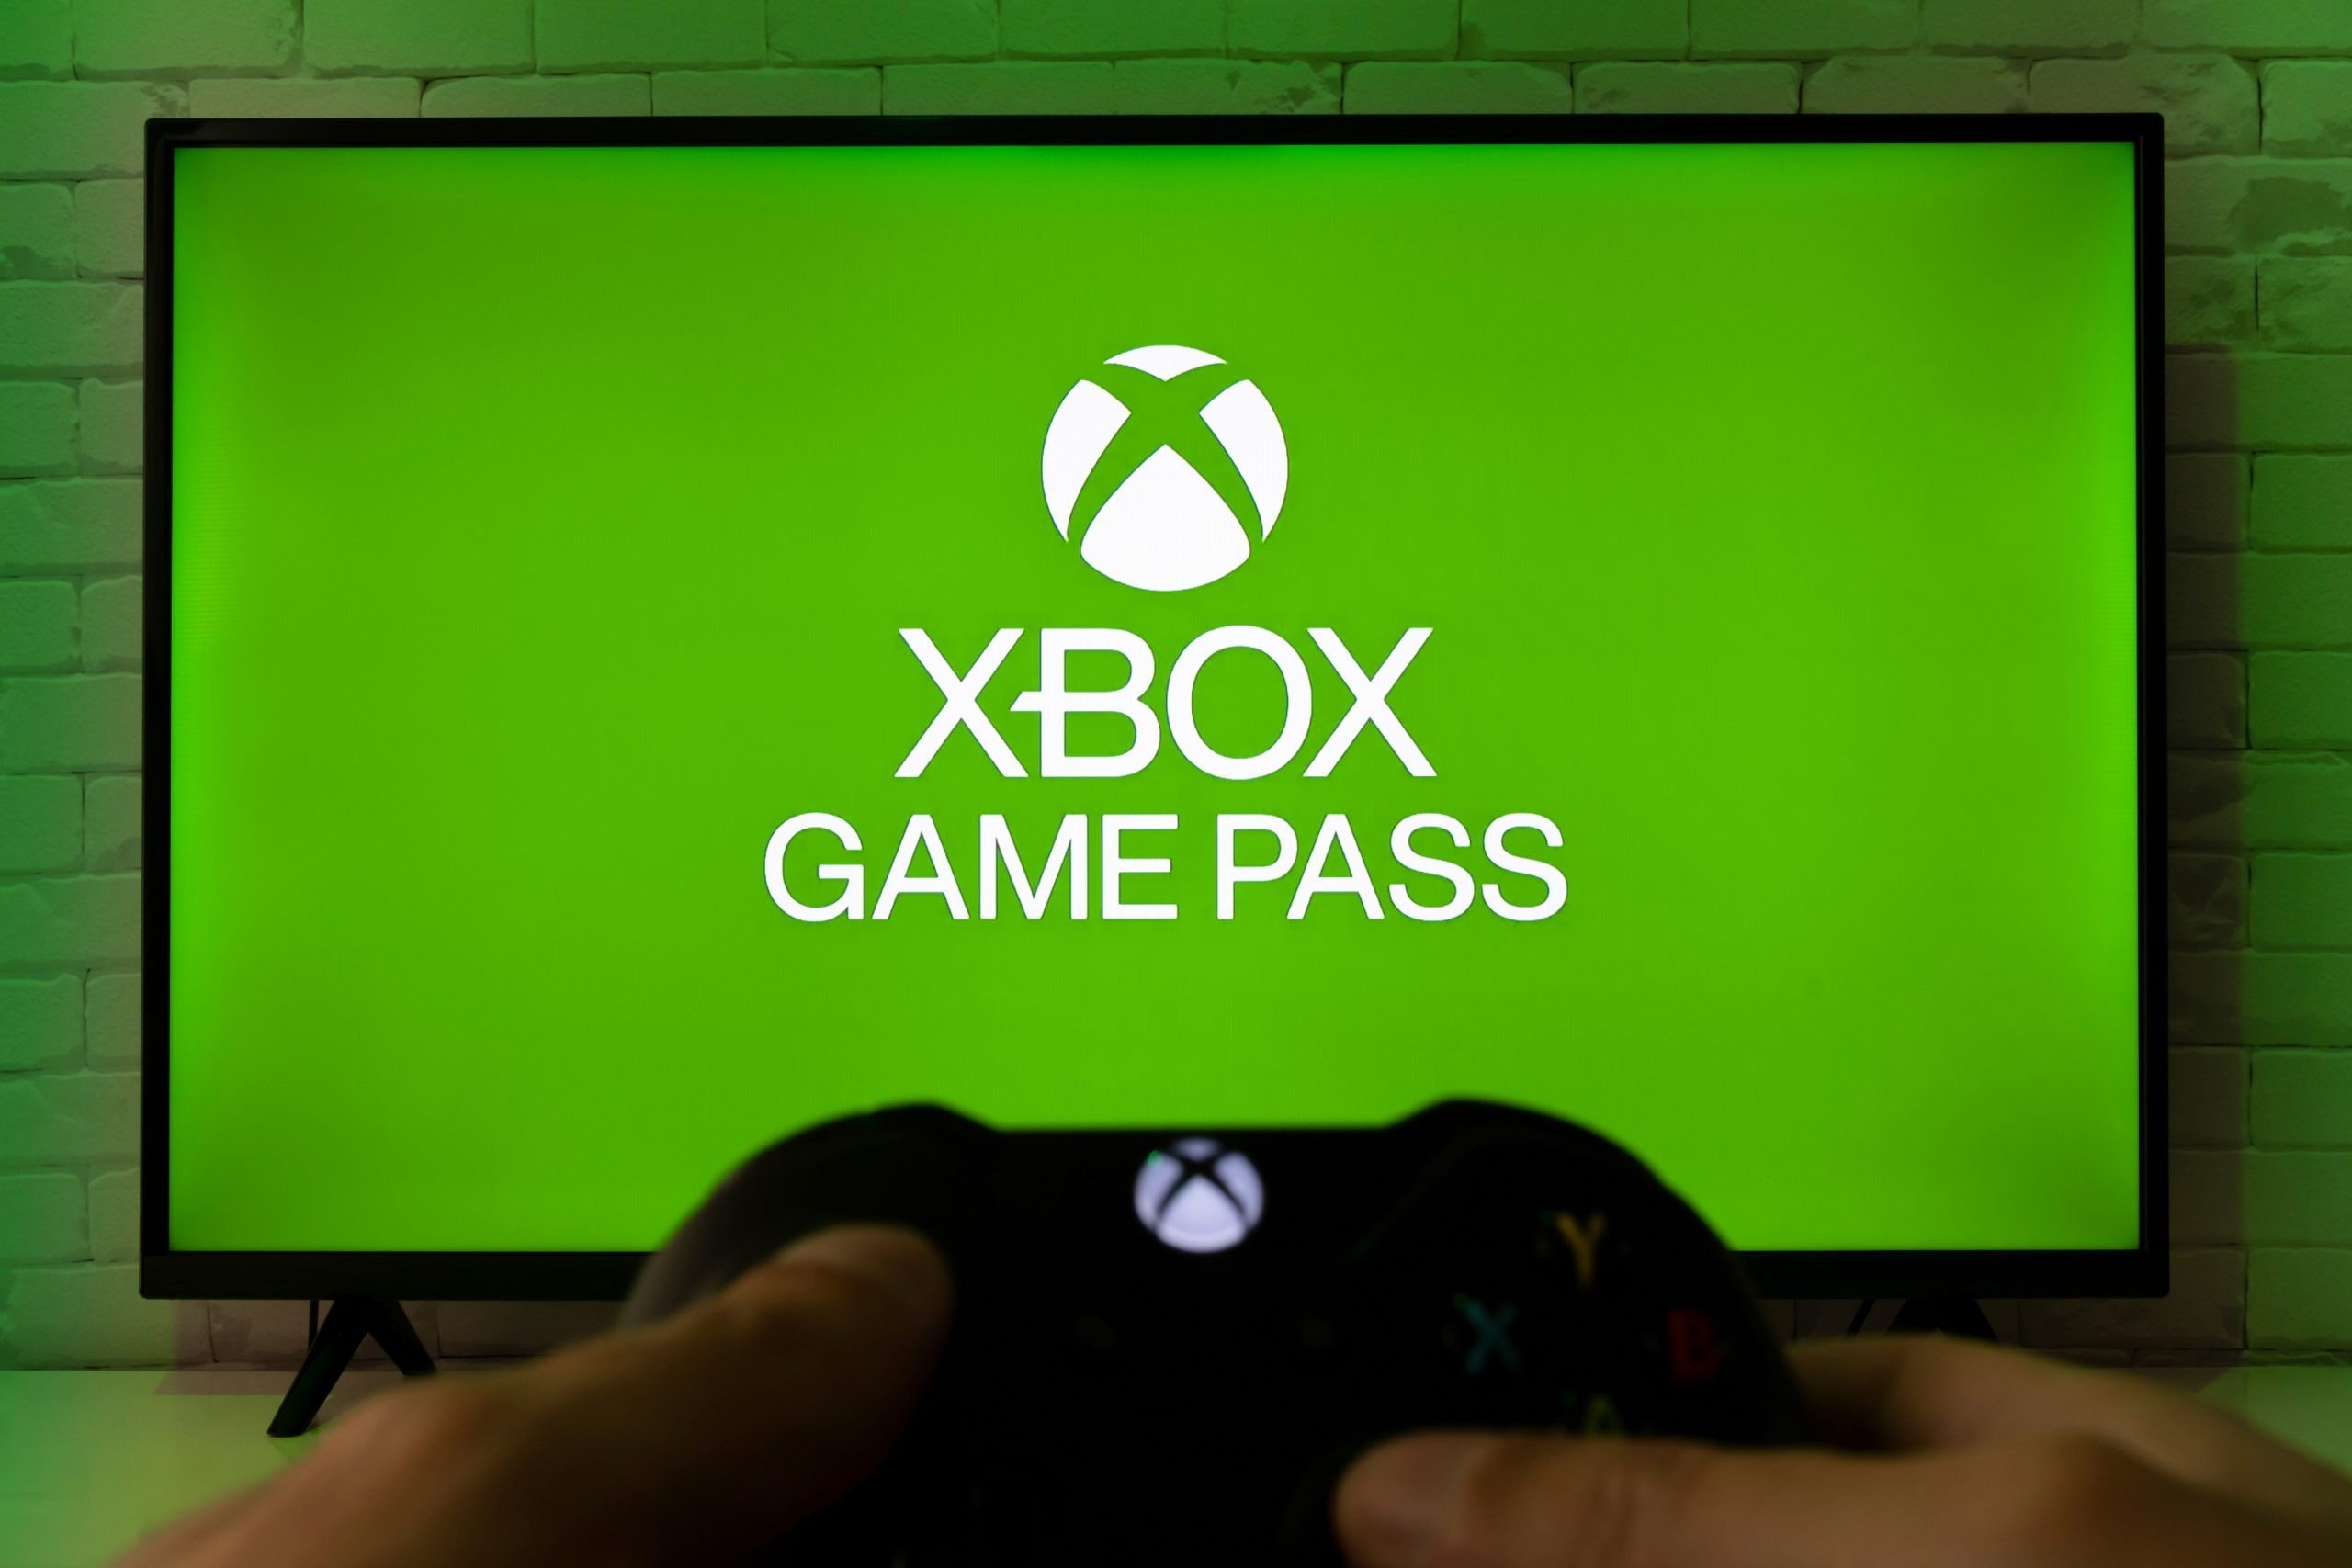 Xbox is getting a smart TV app and streaming stick for cloud